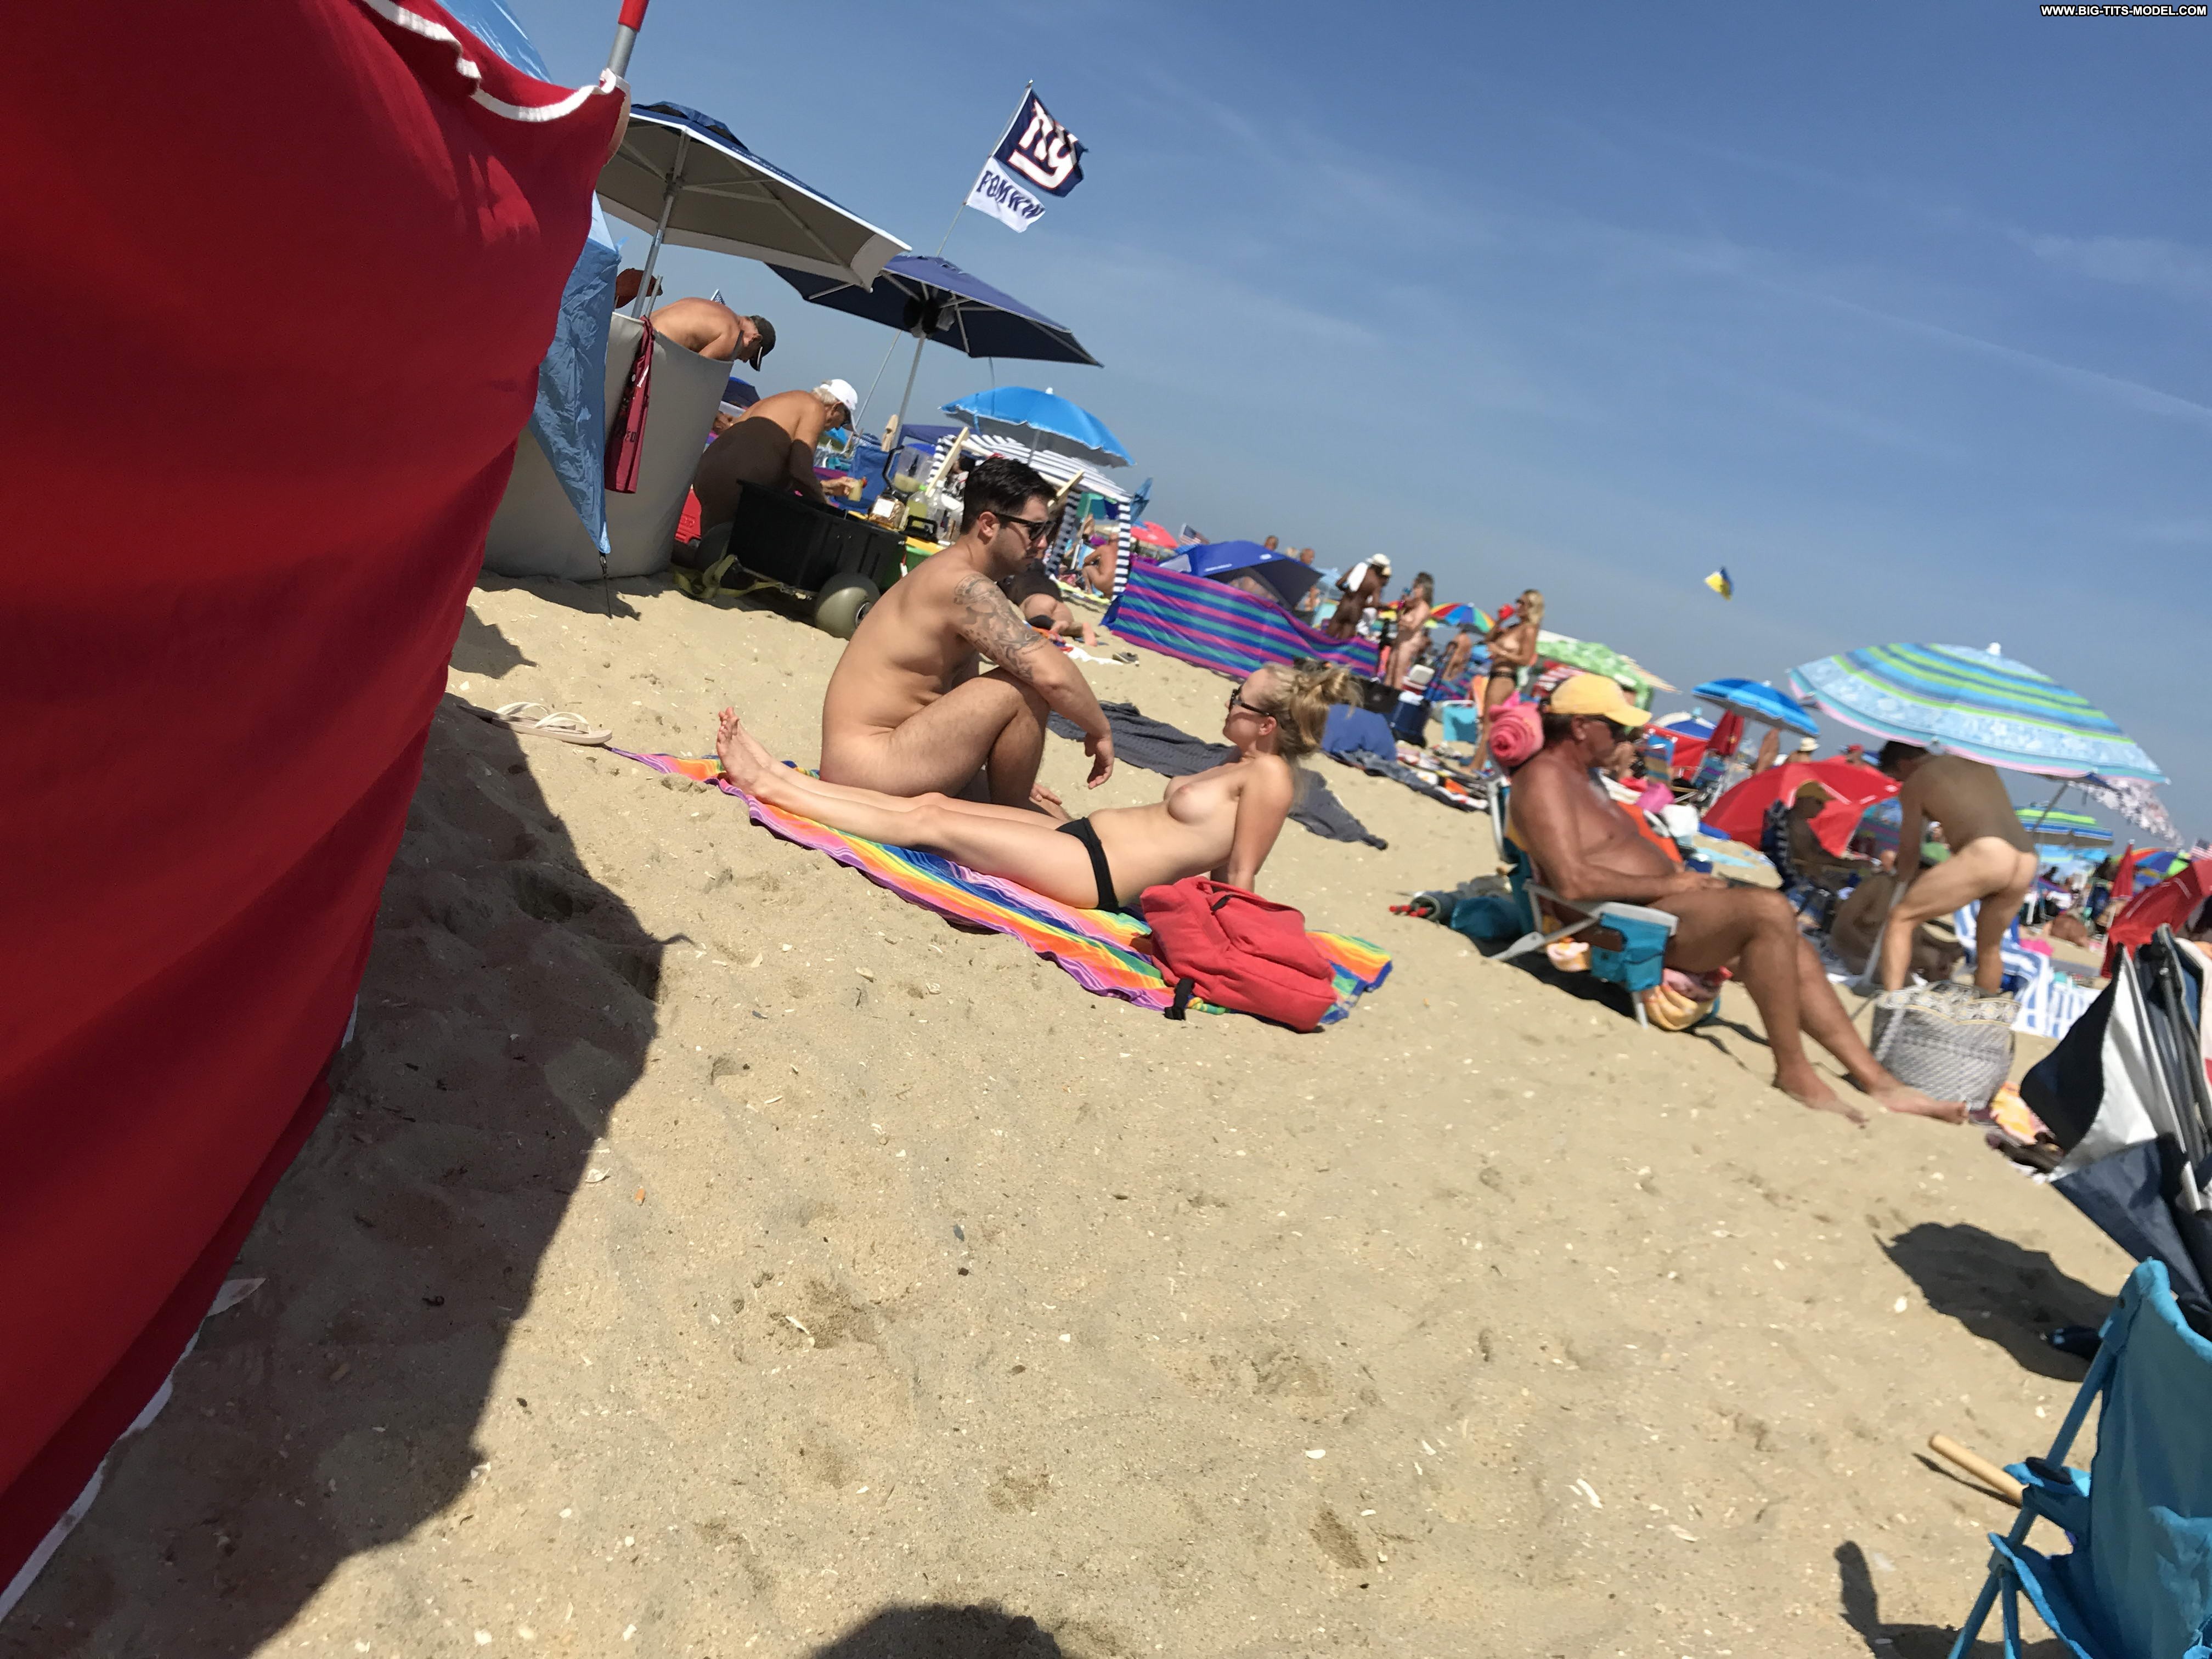 Miriam Naked Girls Caught Tanning Voyeur Nude Ass Beach Unaware picture image